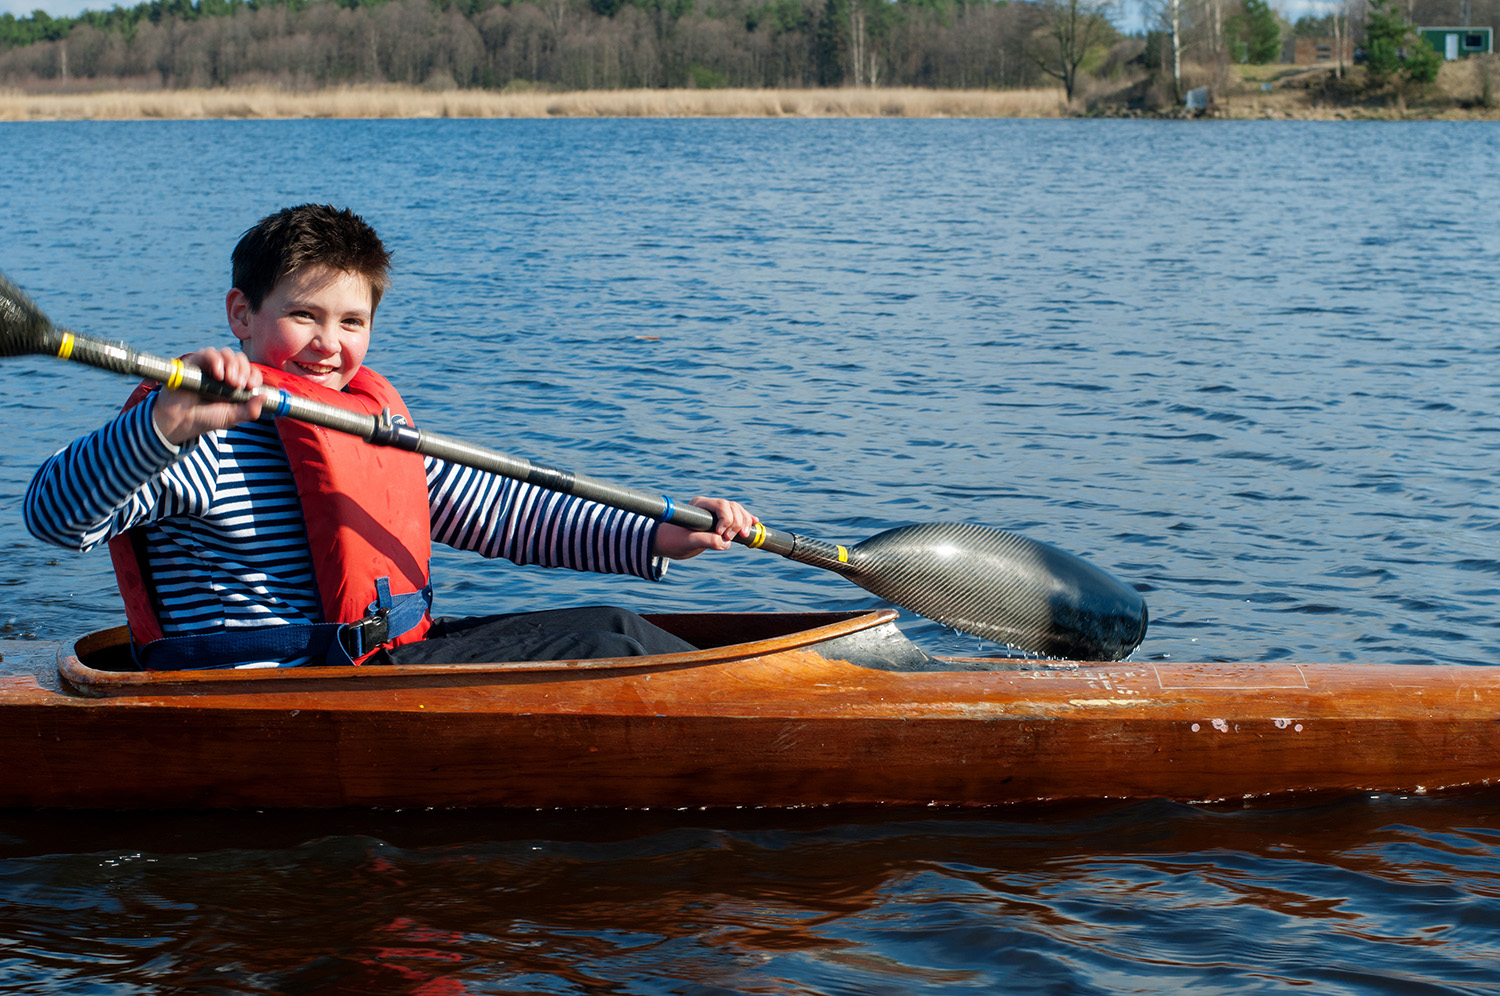 Dollarphotoclub_81755148_The-boy-rowing-in-a-kayak-on-the-river